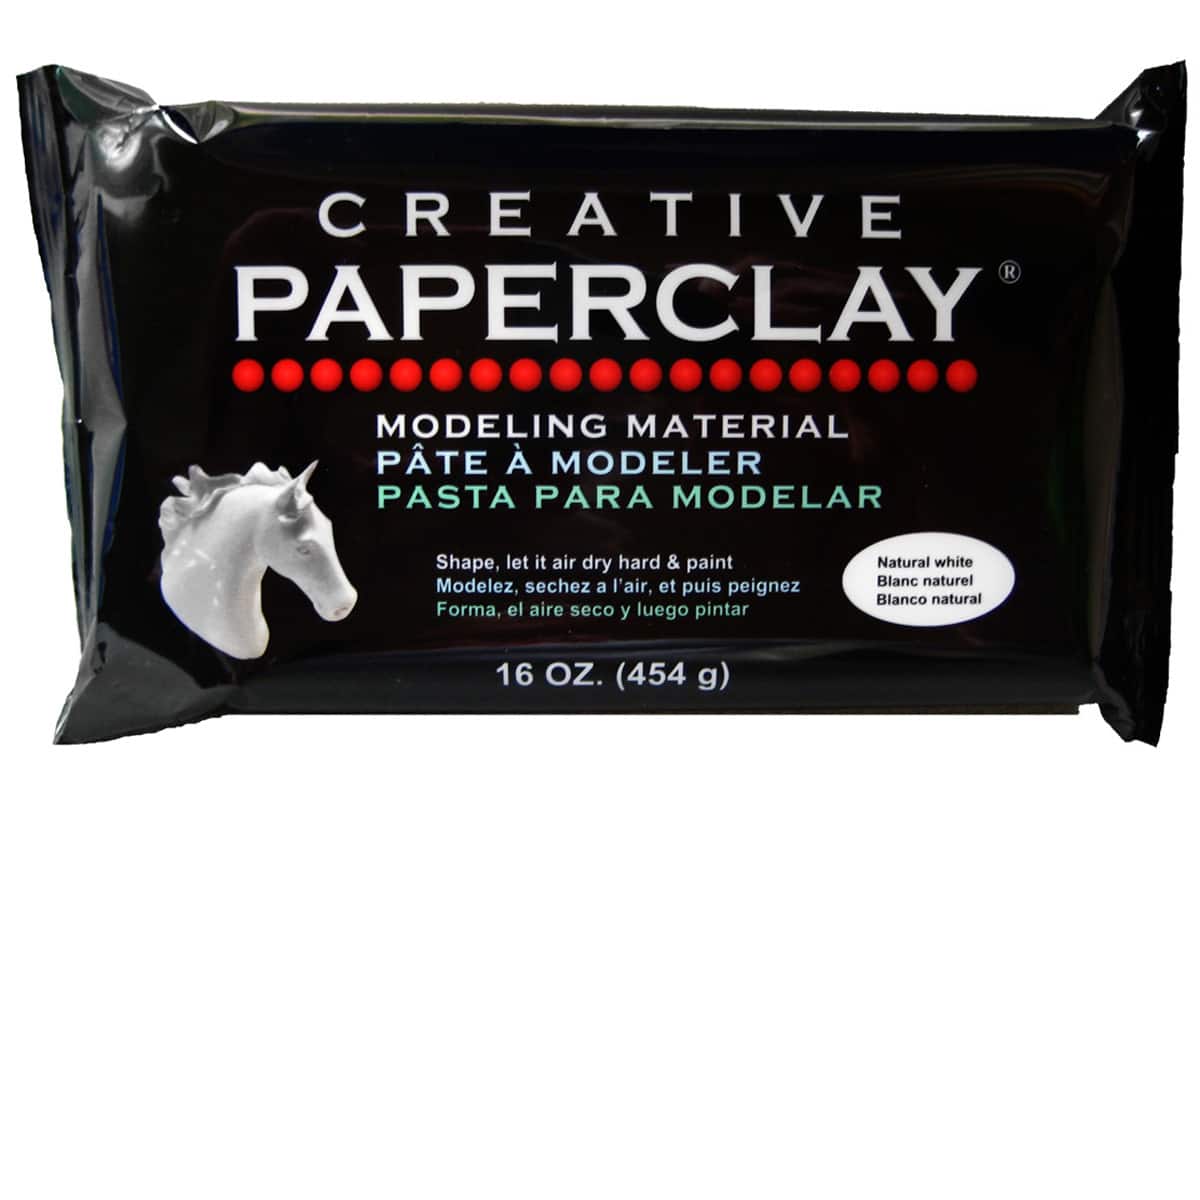 Creative Paperclay® Modeling Material 